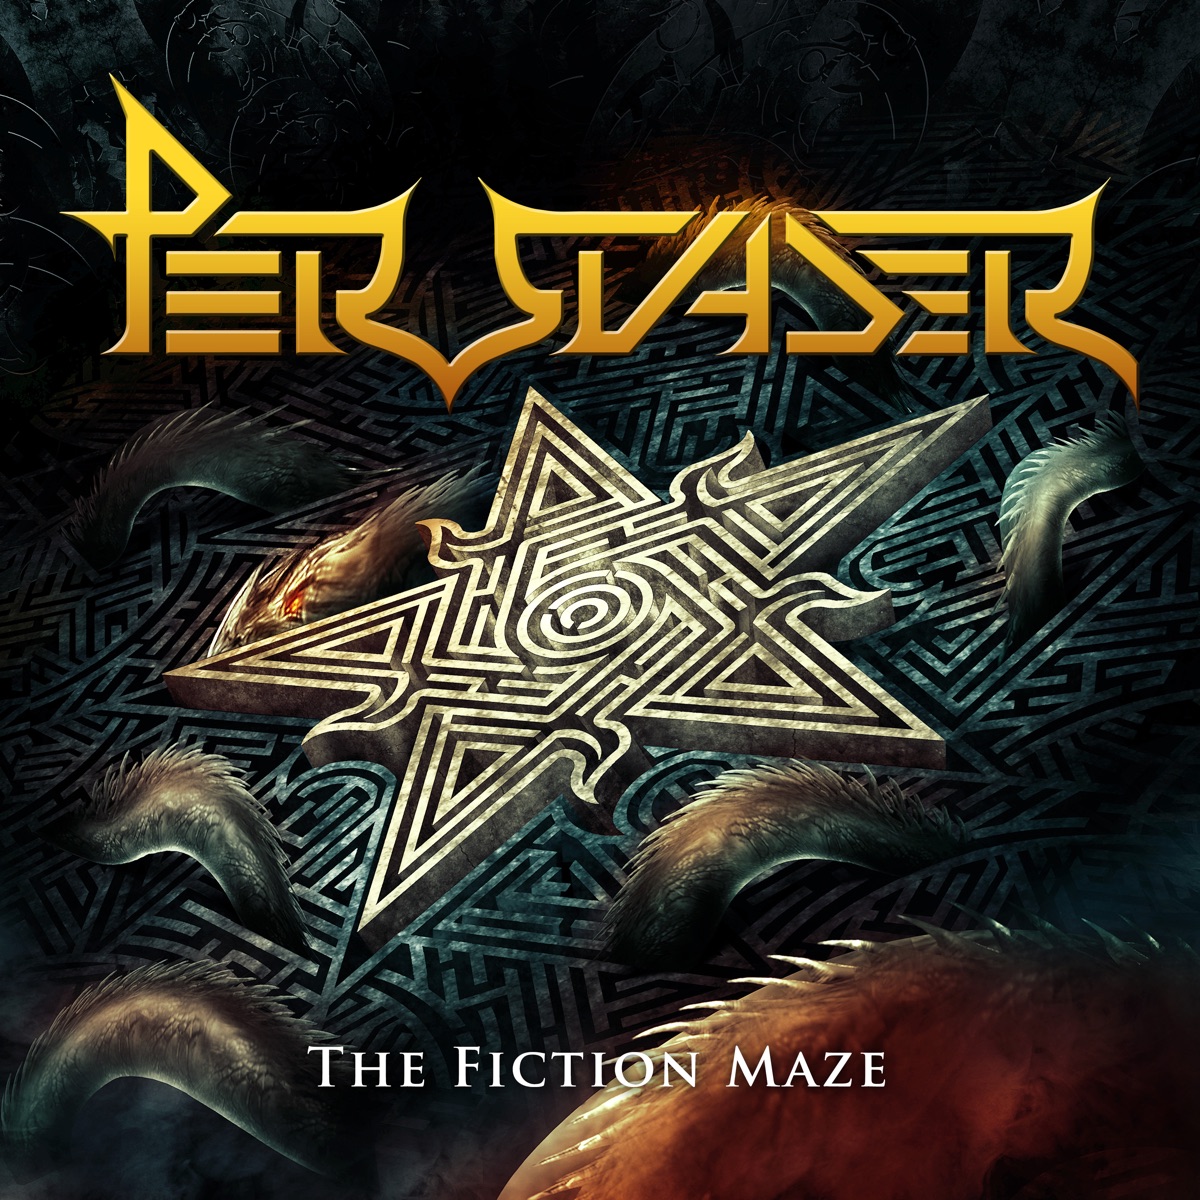 The Hunter - Album by Persuader - Apple Music